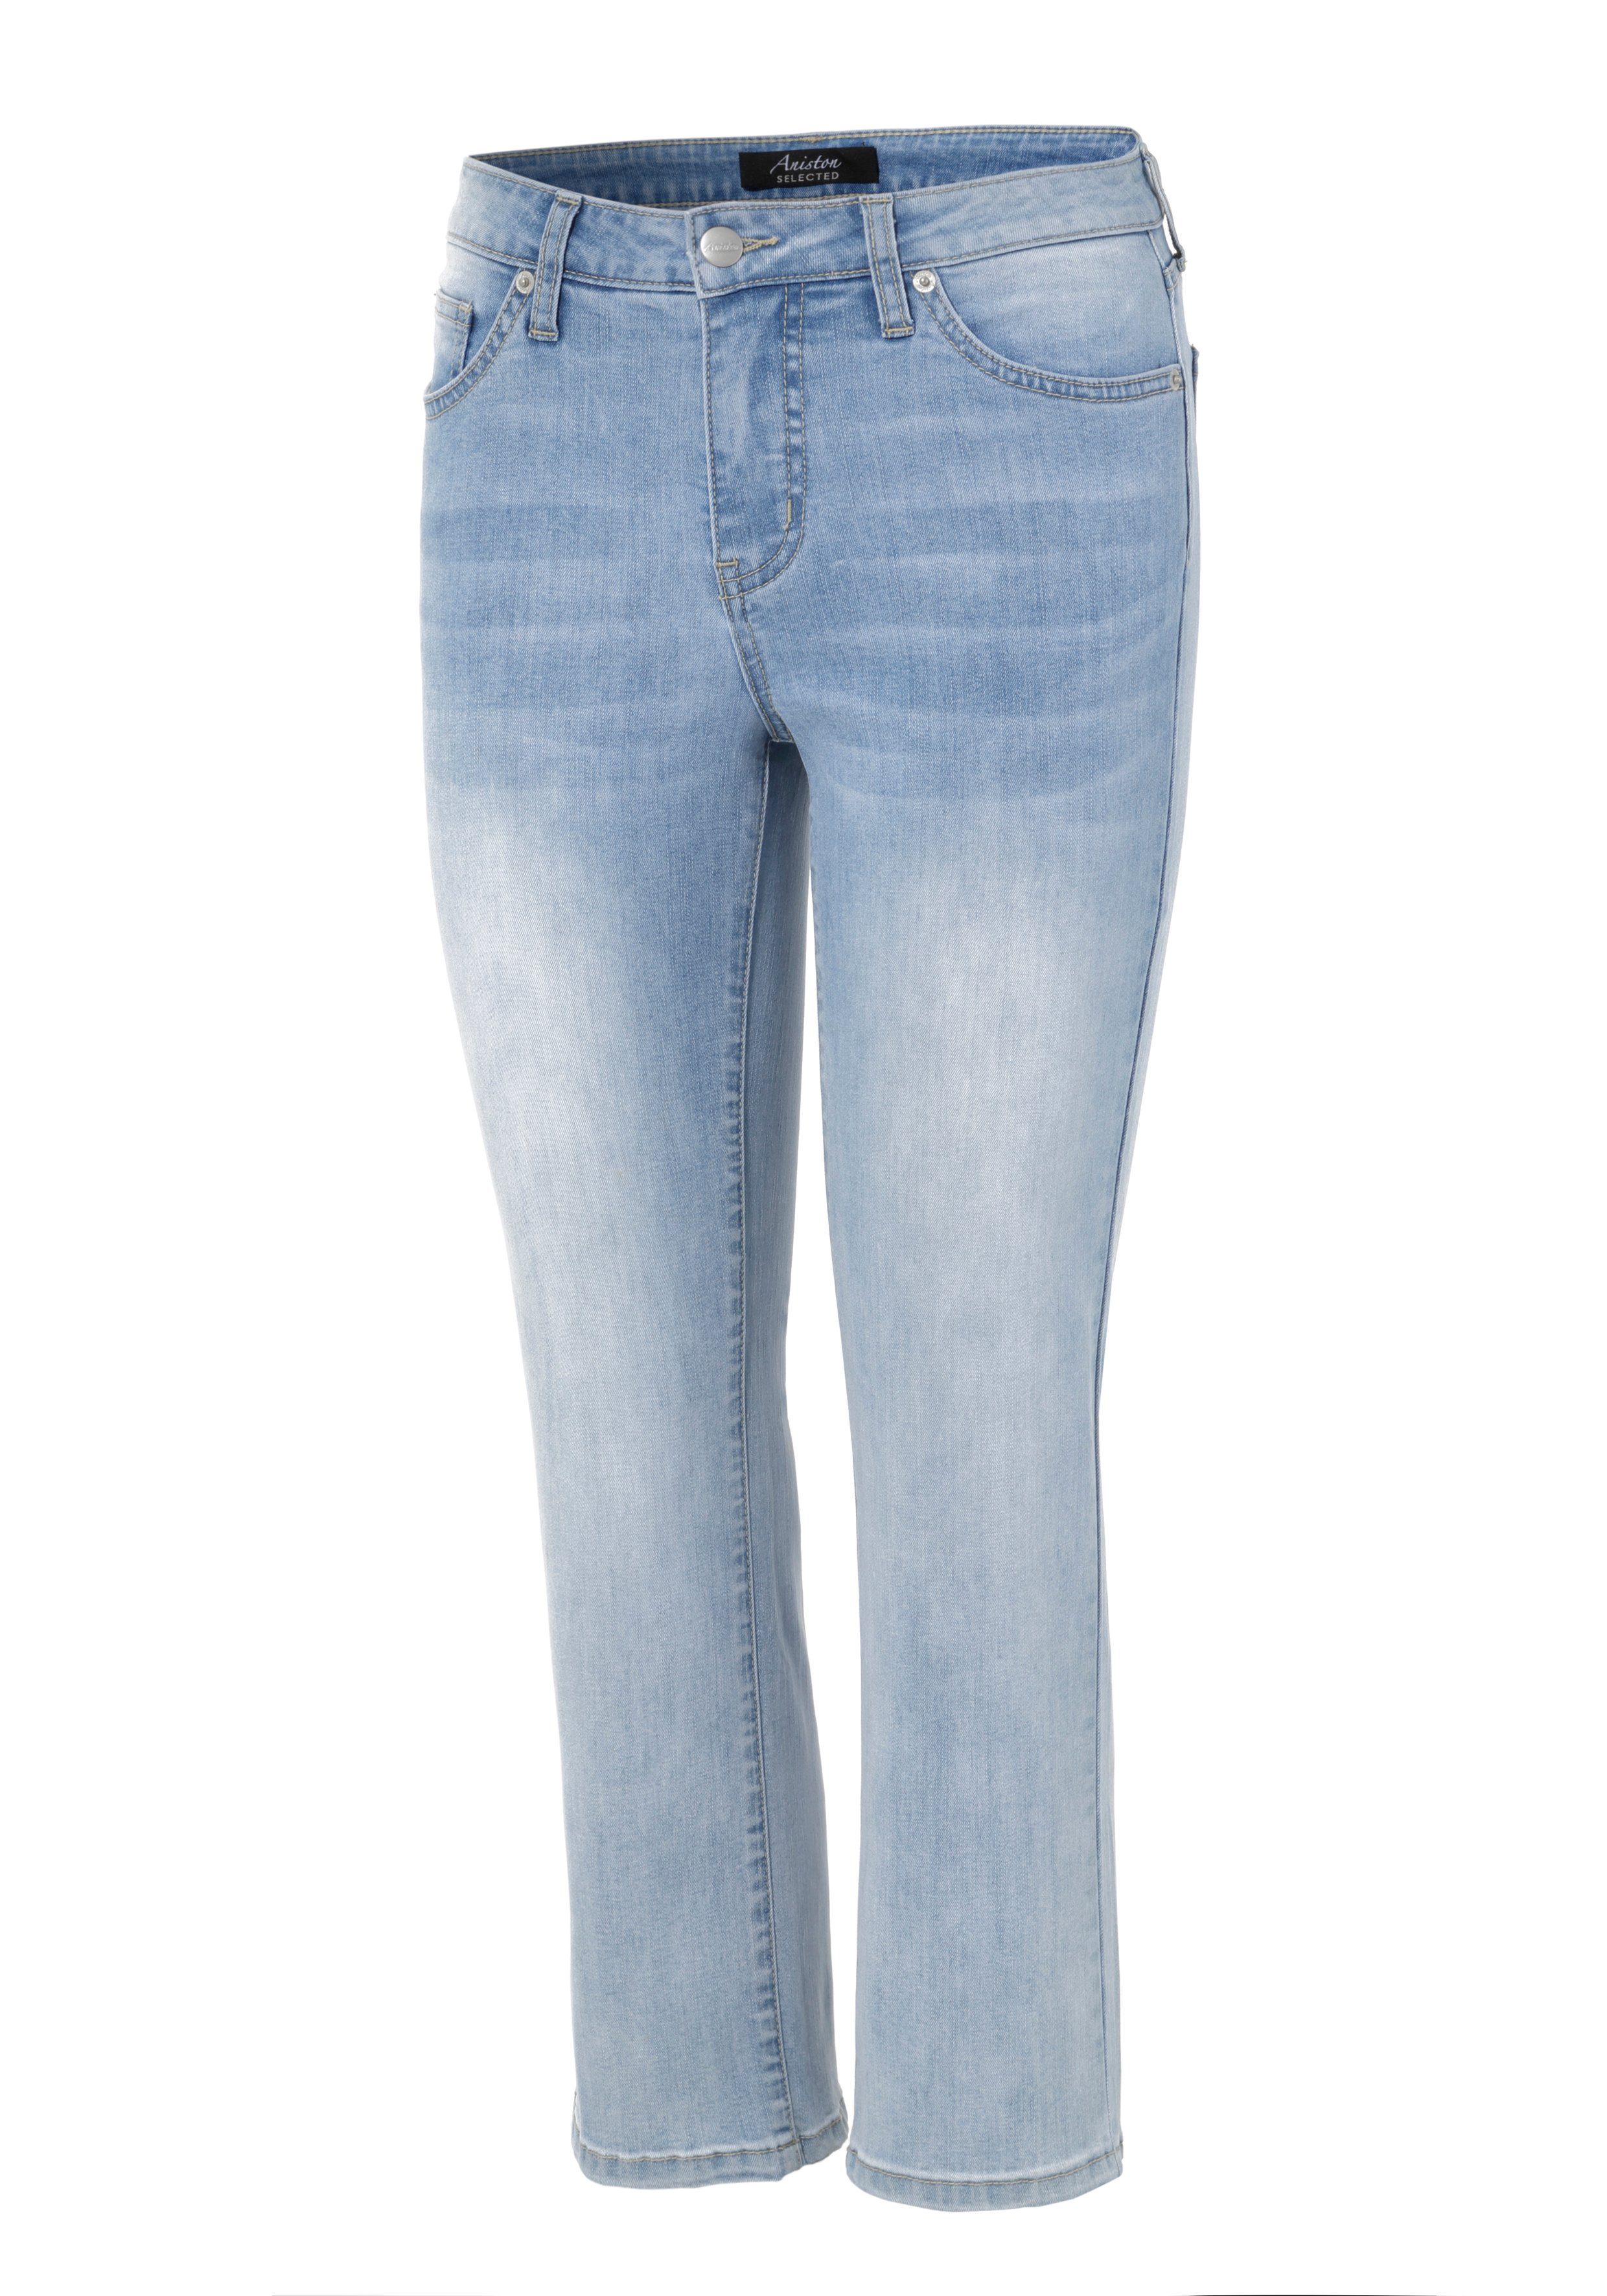 Aniston SELECTED Straight-Jeans in cropped Länge light-blue-washed verkürzter